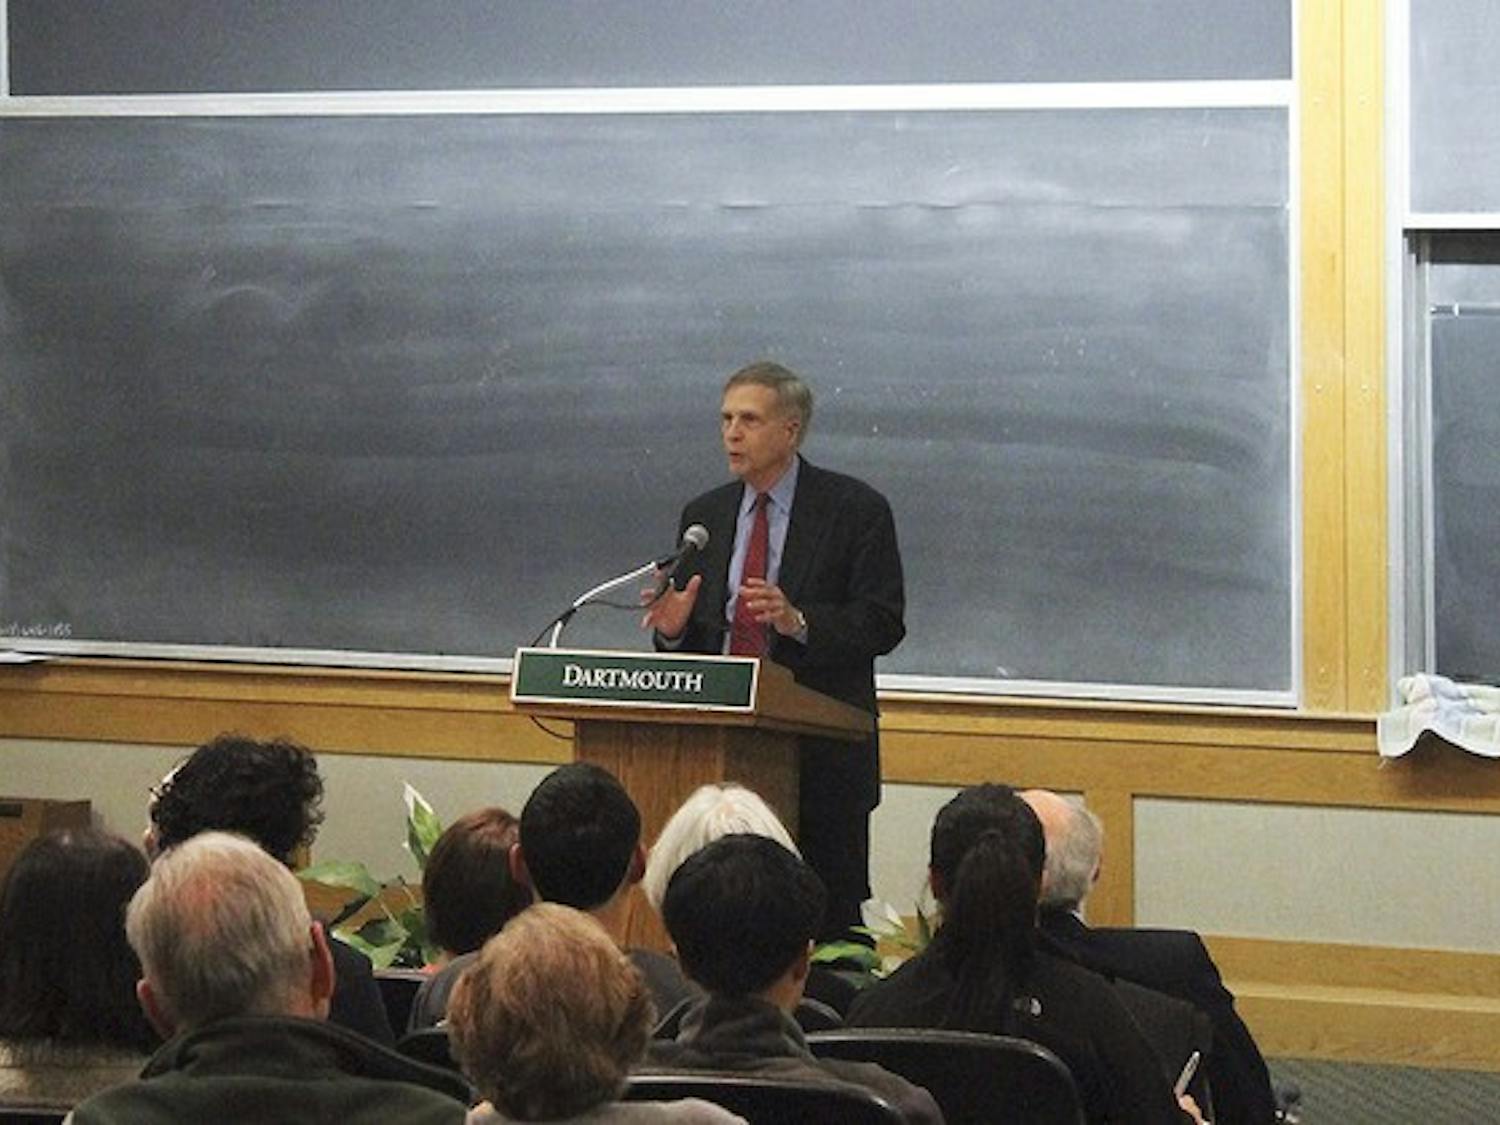 Winston Lord, Montgomery Fellow and former U.S. ambassador to China, spoke Wednesday about the future of U.S.-China relations. 